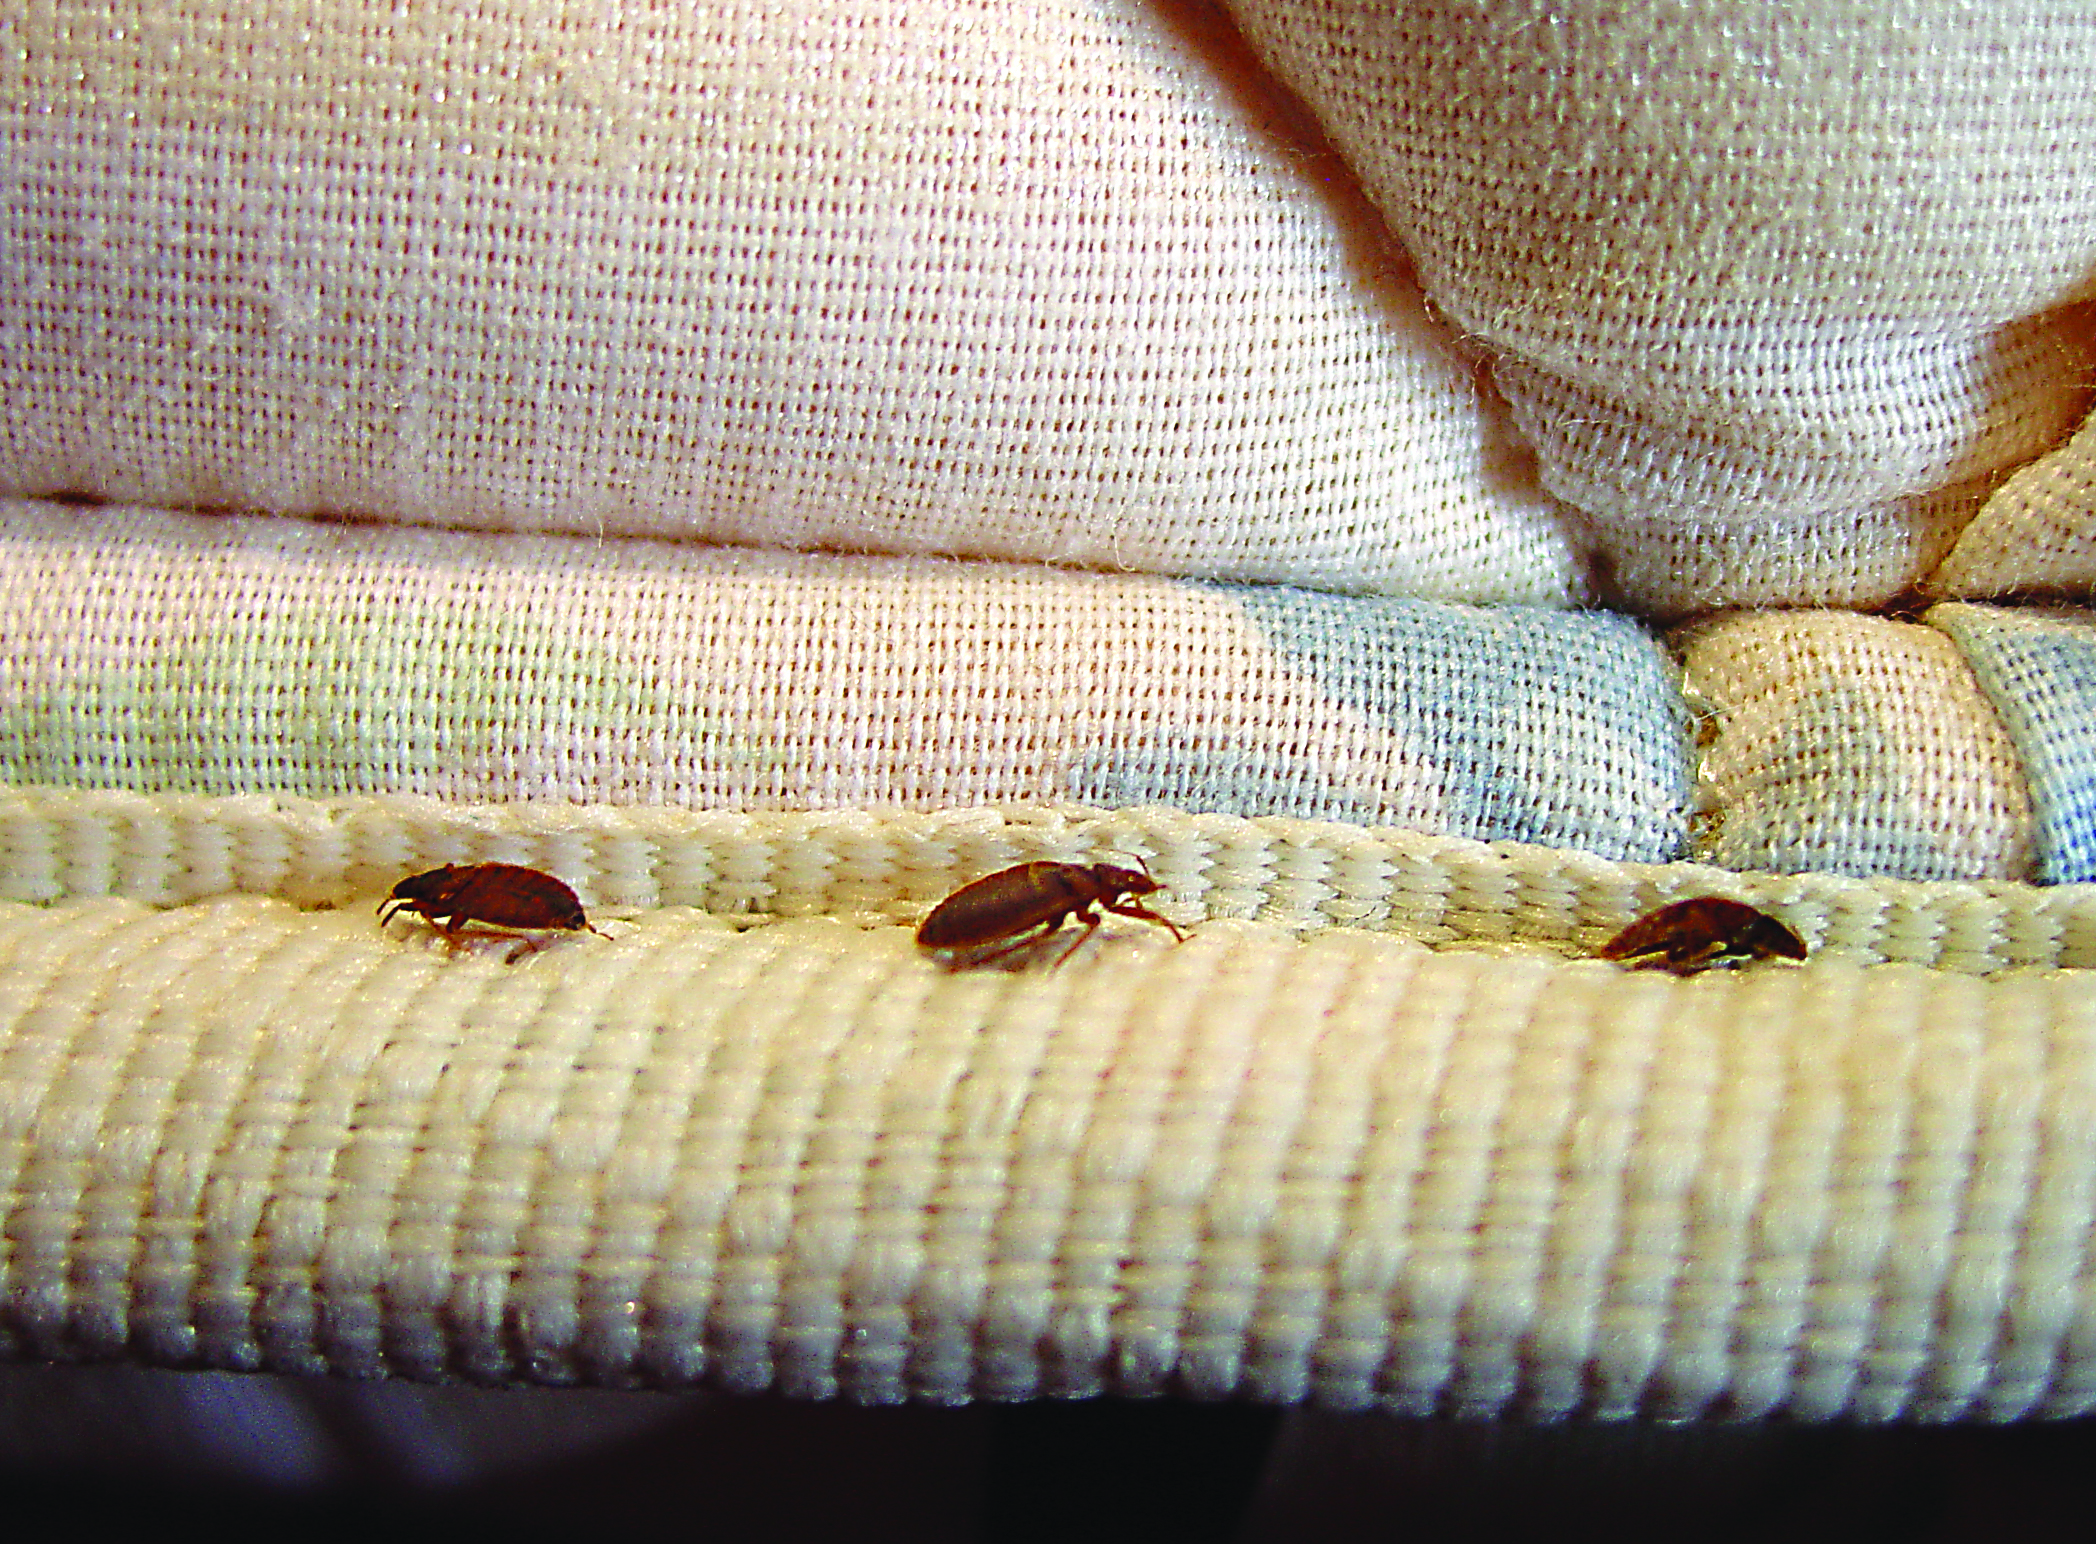 picture of bed bug on mattress